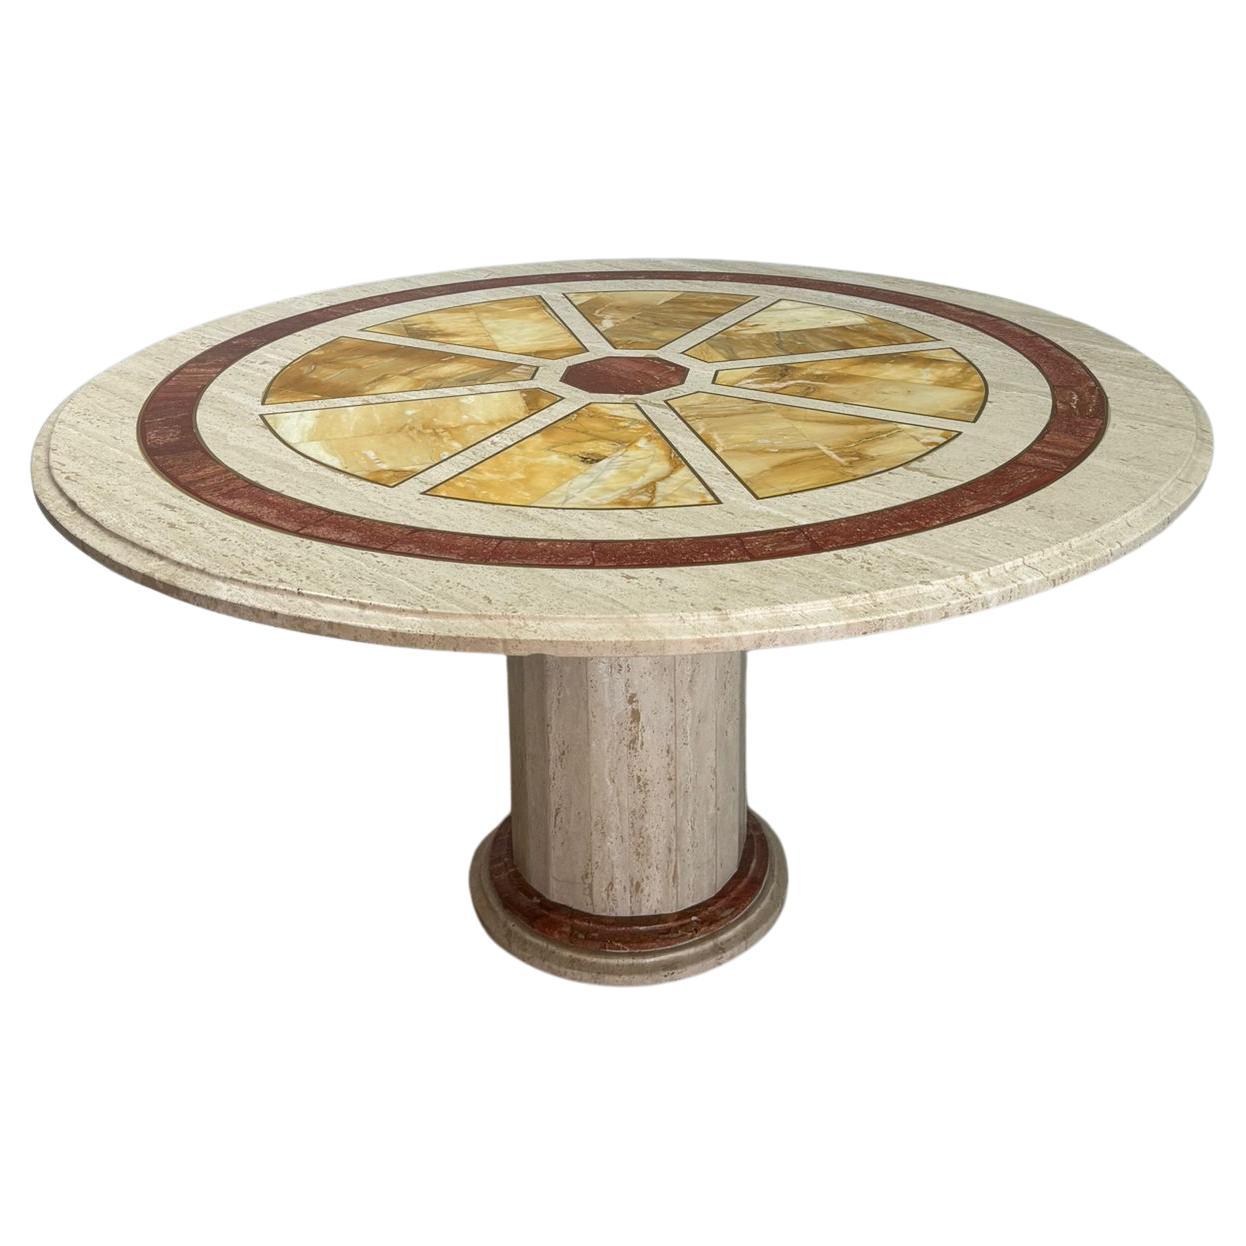 Round travertine diningtable with yellow marble and brass inlay For Sale